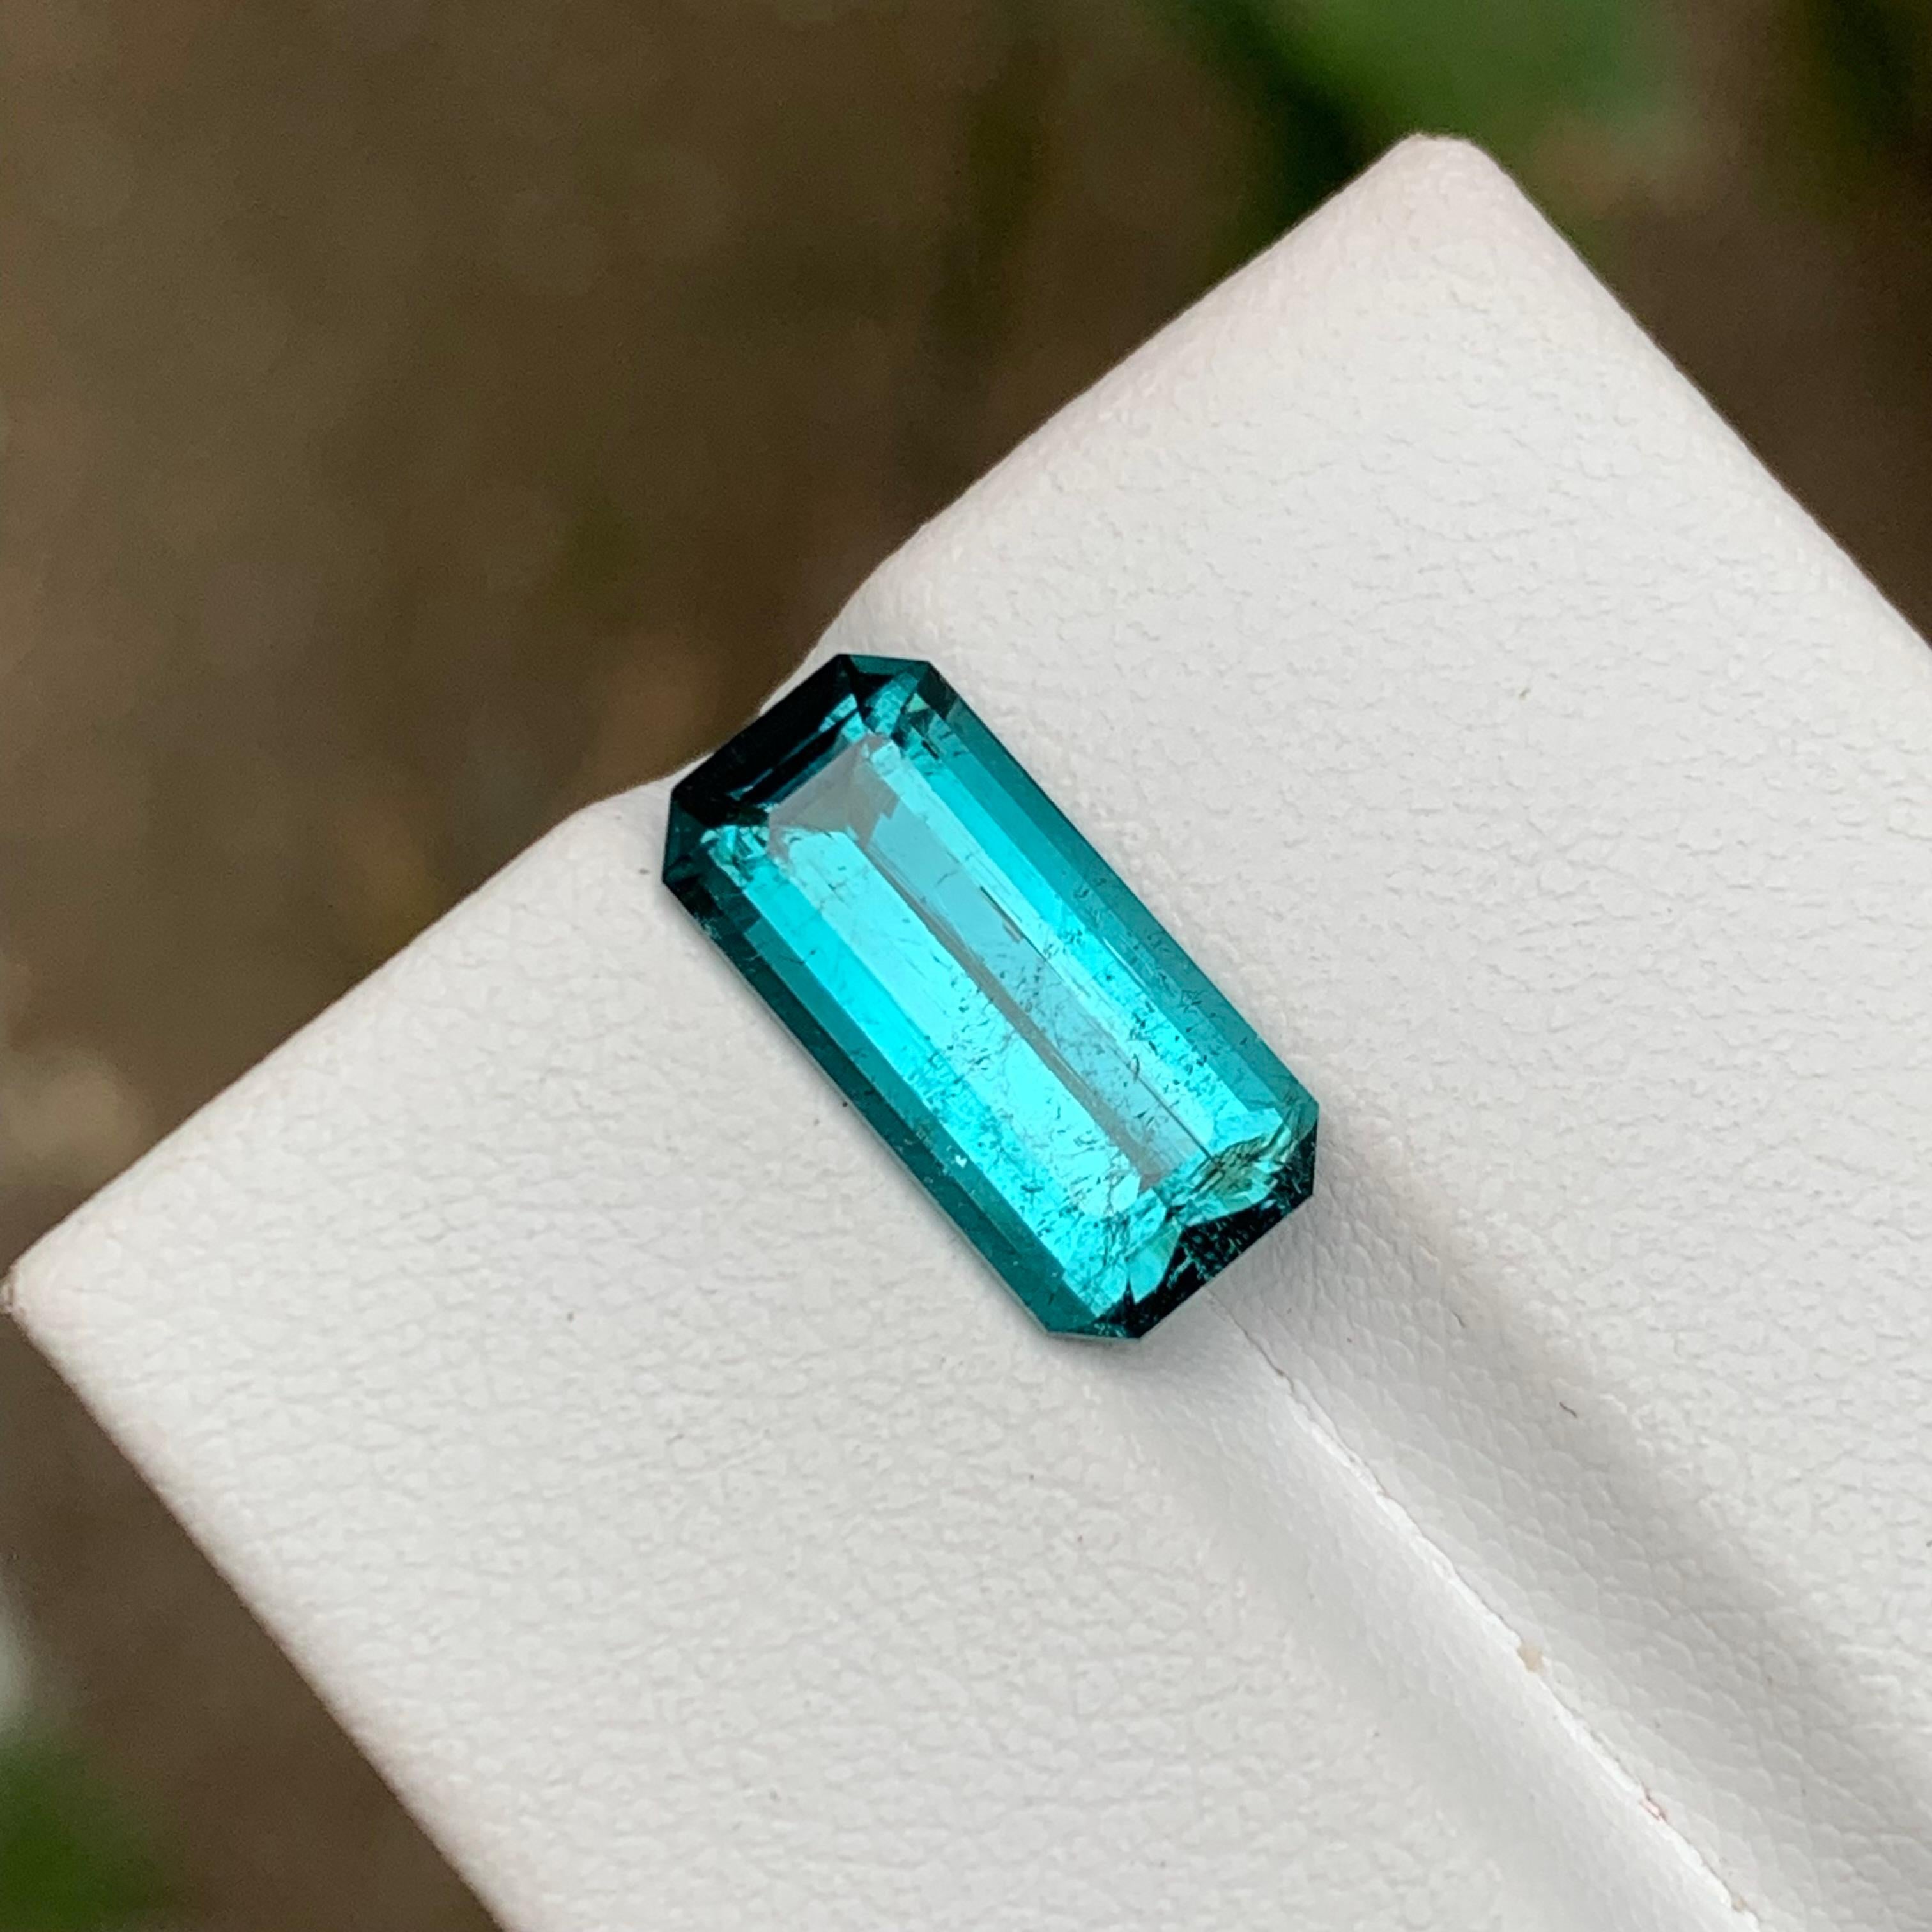 GEMSTONE TYPE: Tourmaline
PIECE(S): 1
WEIGHT: 4.00 Carats
SHAPE: Emerald Cut
SIZE (MM): 13.82 x 6.72 x 5.07
COLOR: Neon Electric Blue
CLARITY: Slightly Included
TREATMENT: None
ORIGIN: Afghanistan
CERTIFICATE: On demand
(if you require a